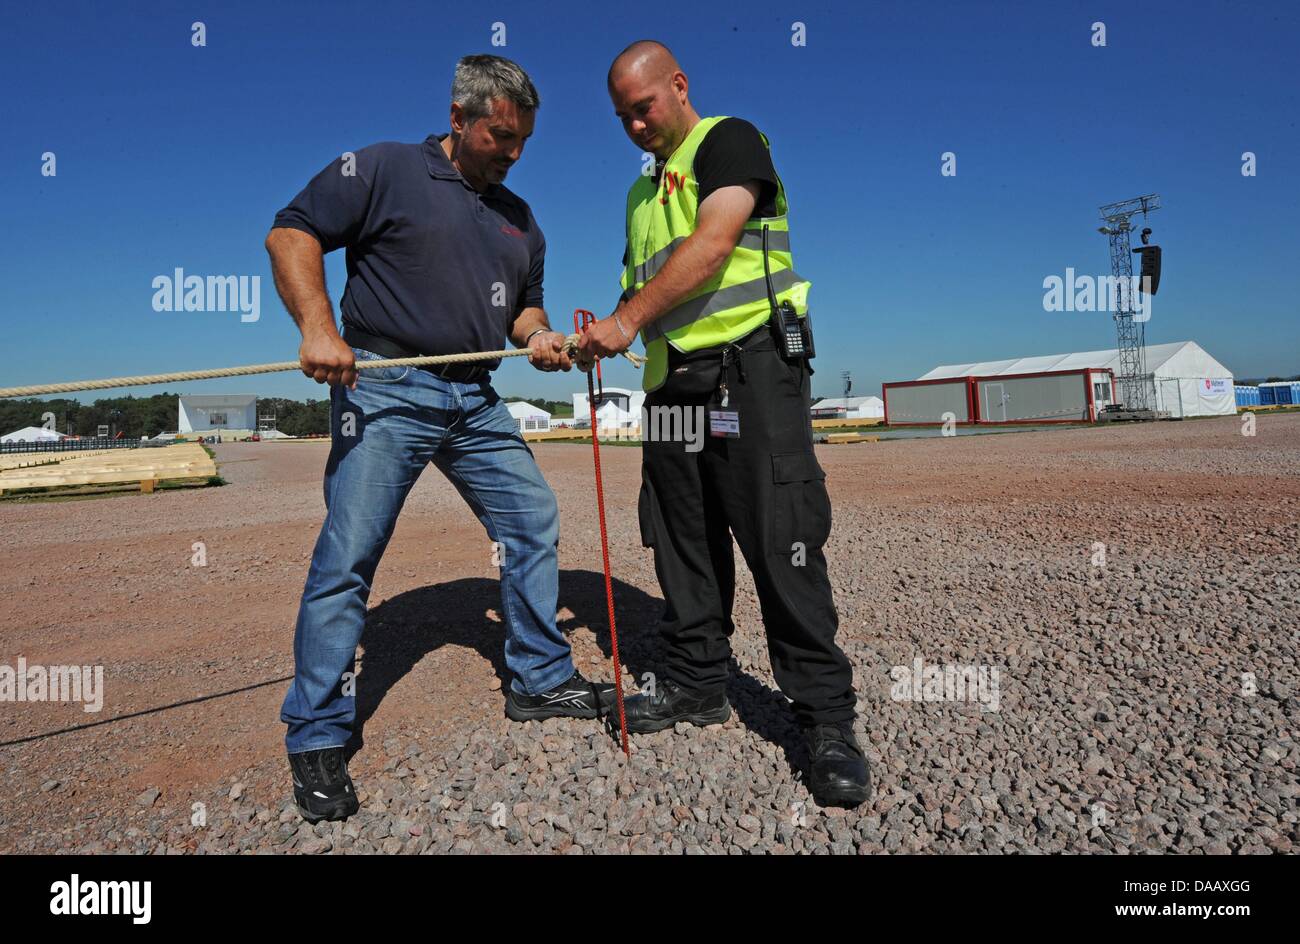 Barny Sancakli (L), head of a security company in Ulm, sets up a security cordon with his employee Alexander Schmidt (R) at the airport in Freiburg, Germany, 21 September 2011. On Sunday, 25 September 2011, the pope will give a mass with more than 100,000 people here. Photo: PATRICK SEEGER Stock Photo